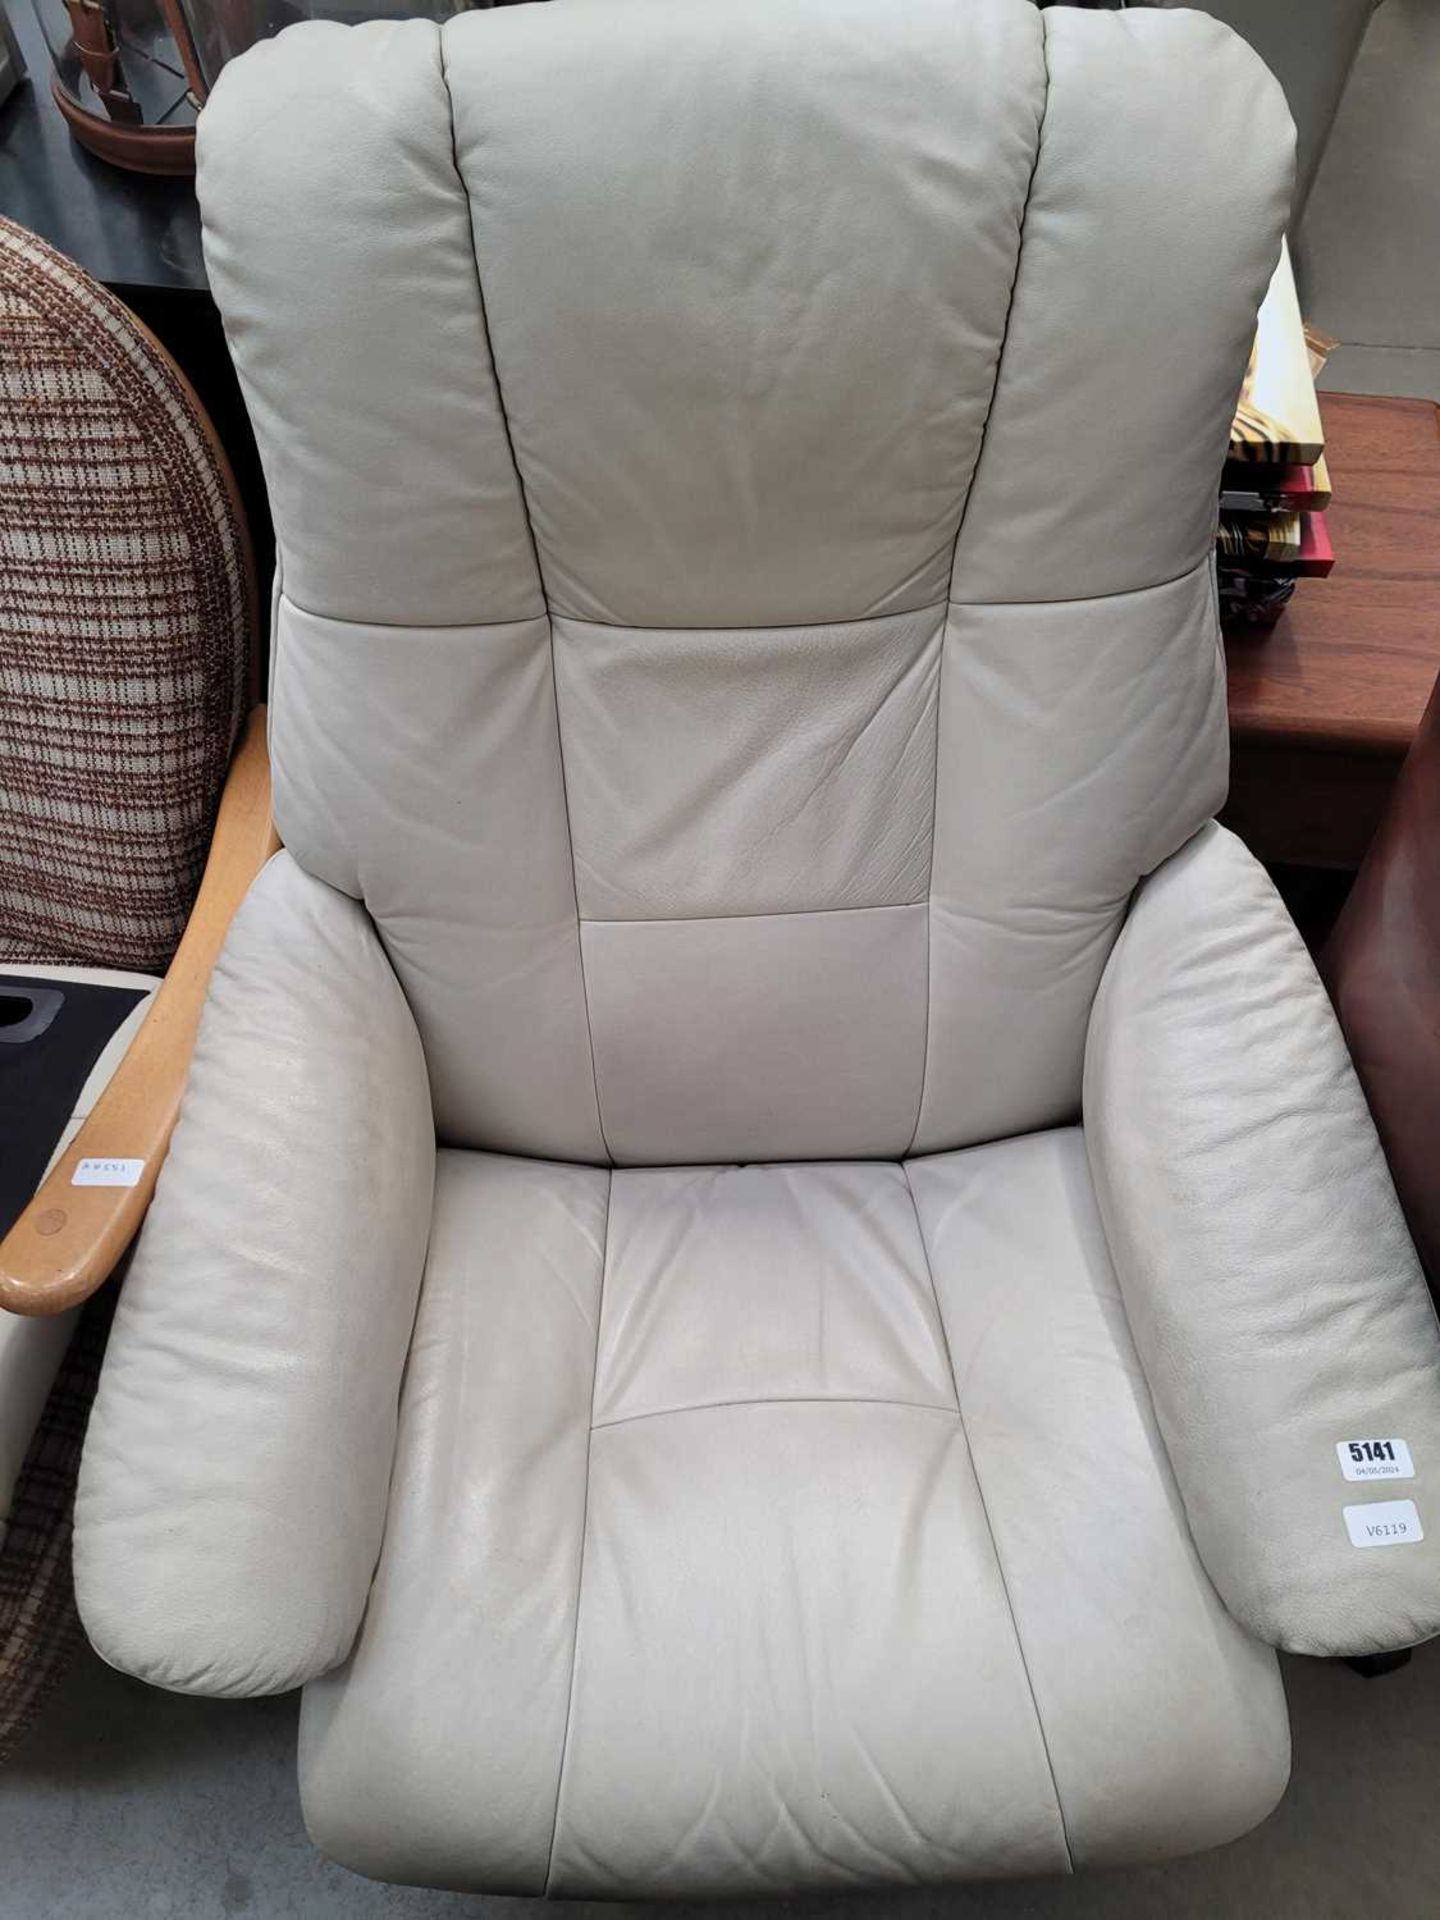 Stressless style swivel armchair with matching footstool - Image 3 of 4